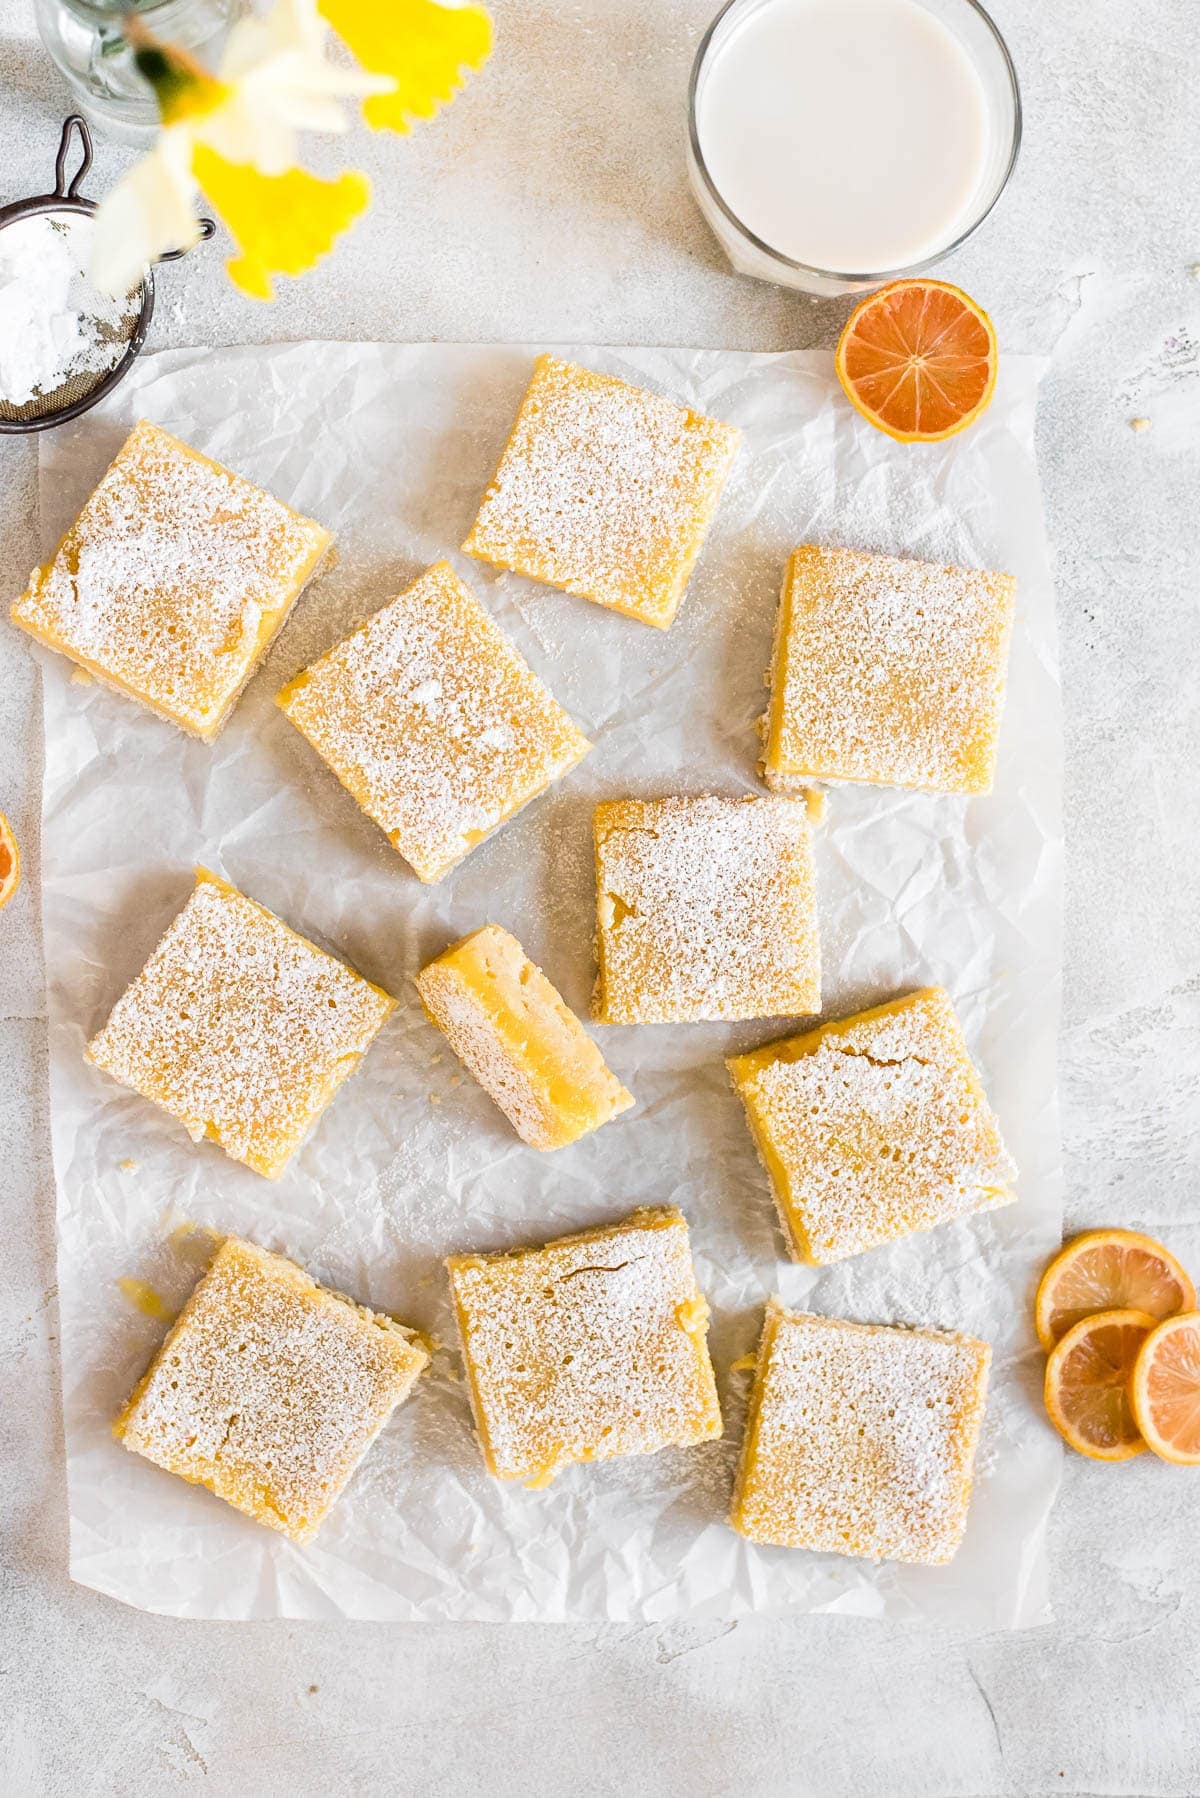 lemon bars on parchment paper dusted with powdered sugar